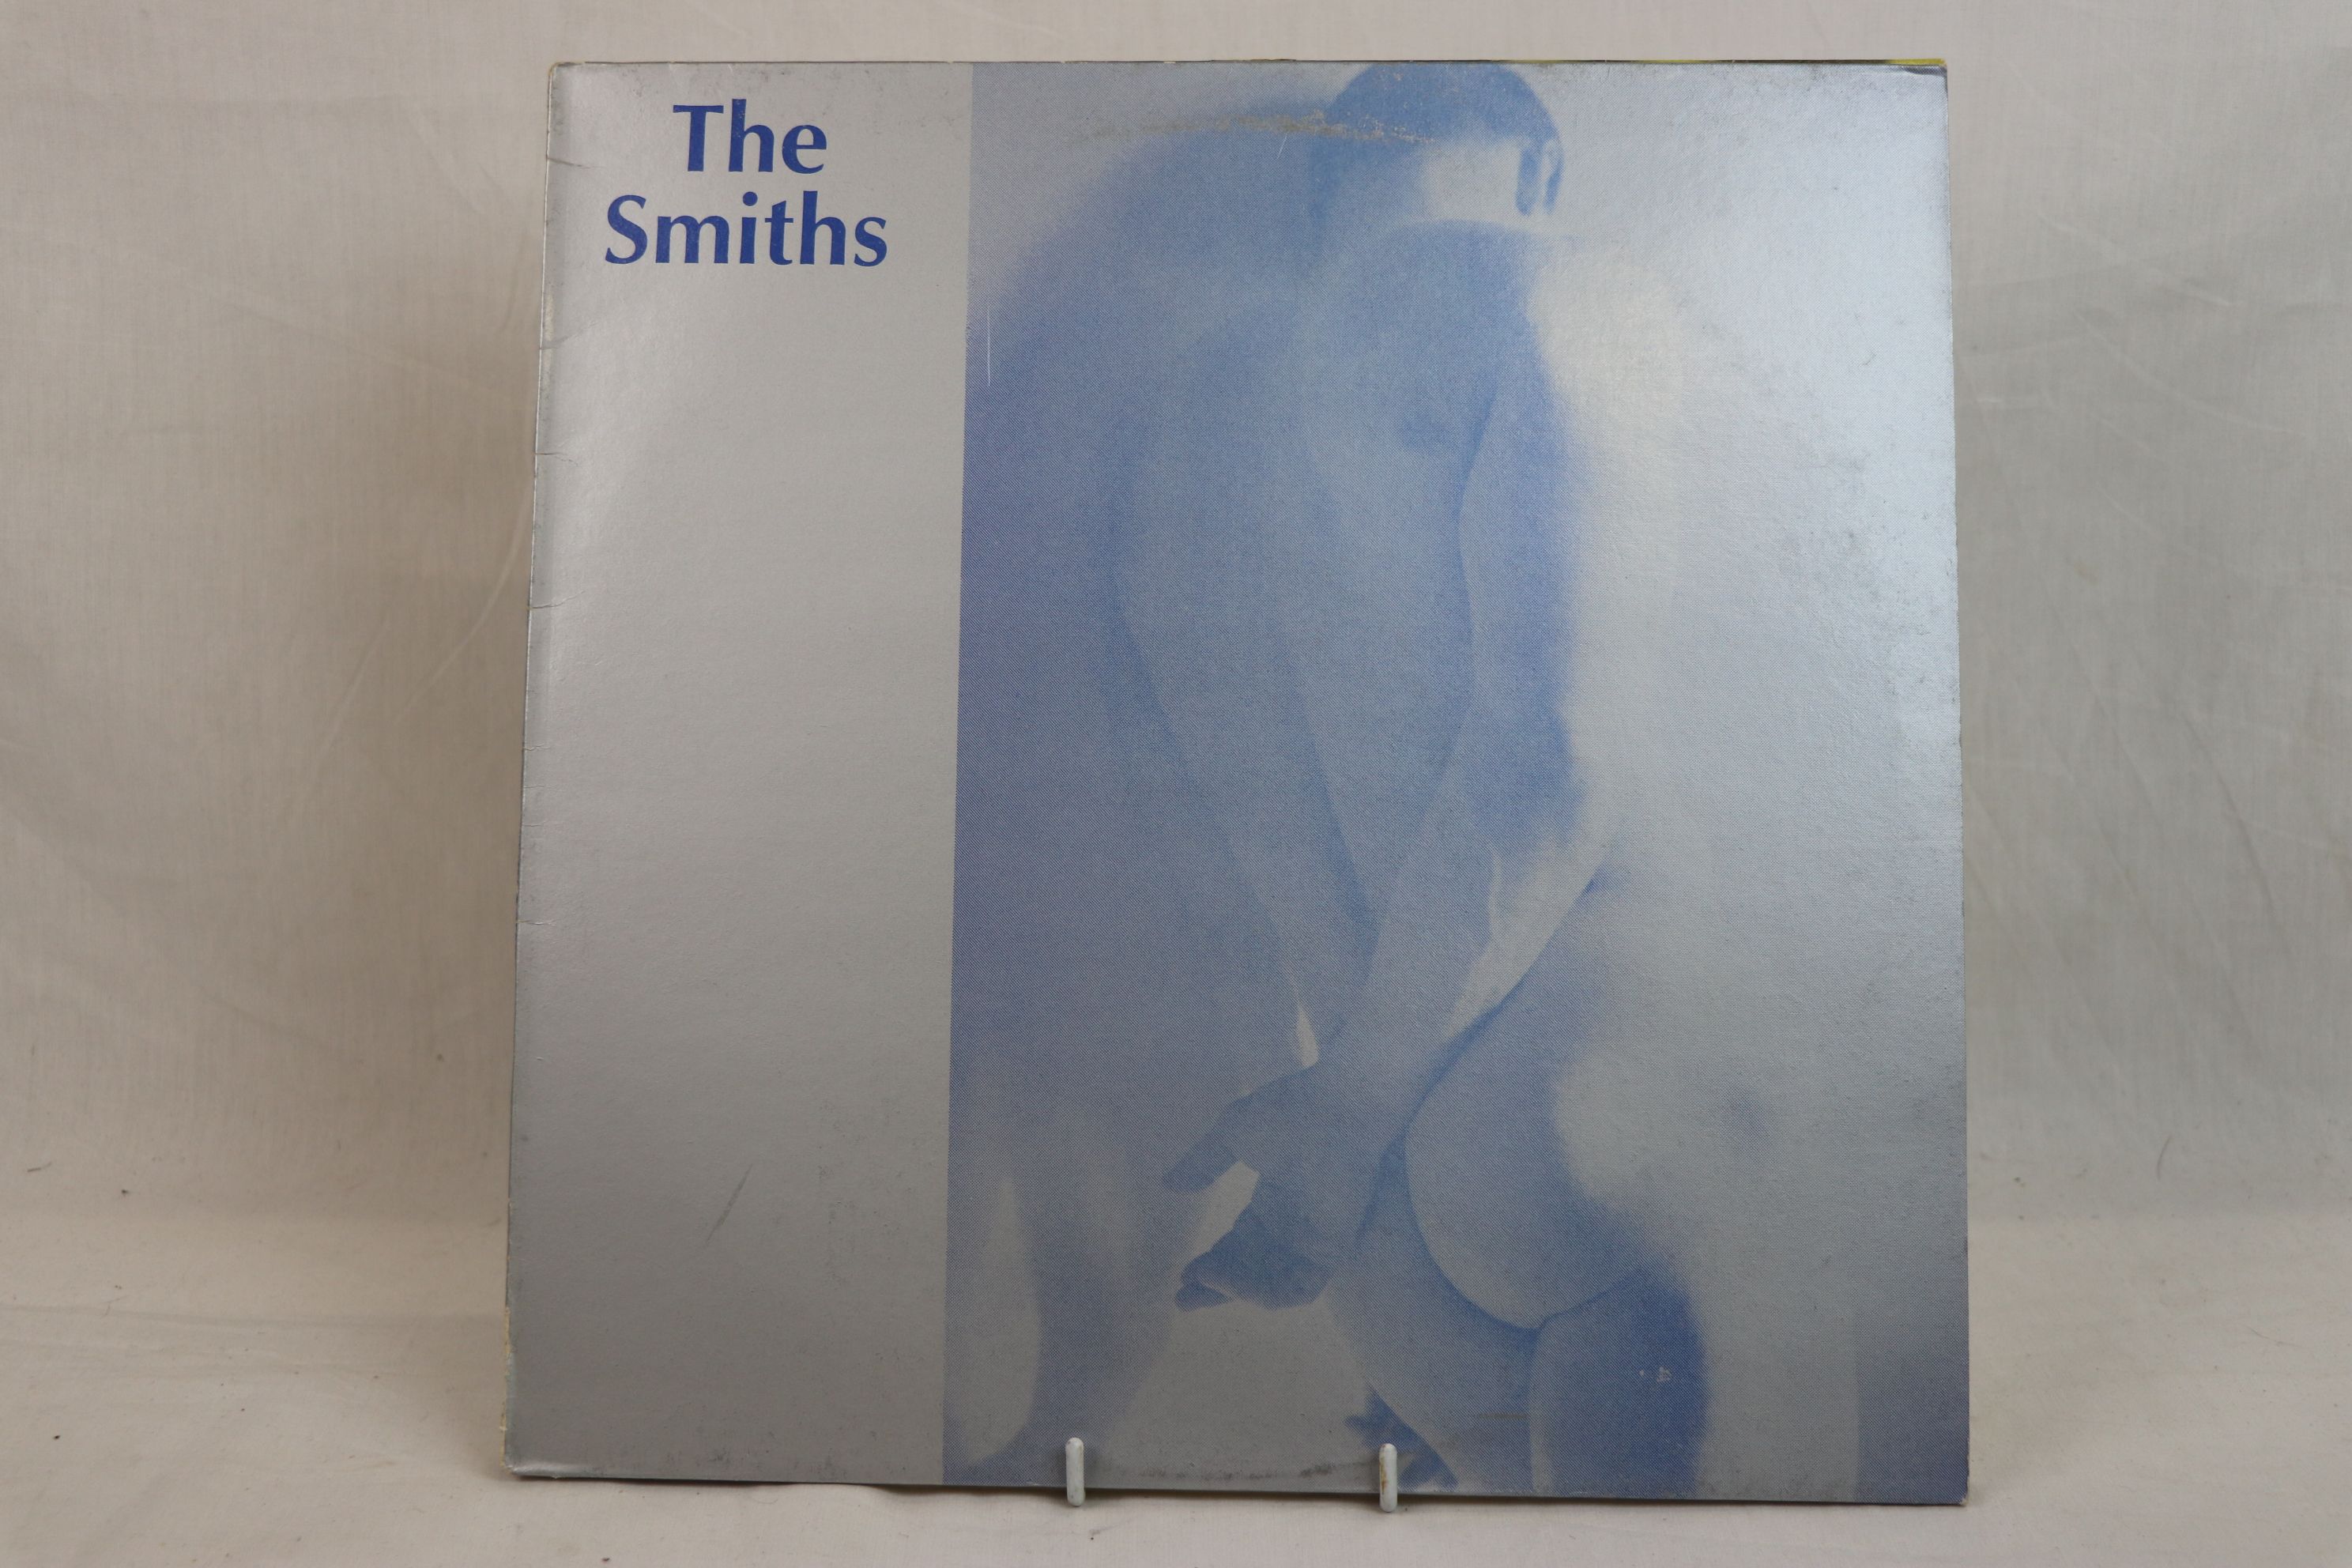 Vinyl - Collection of 7 x The Smiths vinyl 12" singles to include This Charming Man (Rough Trade - Image 7 of 9